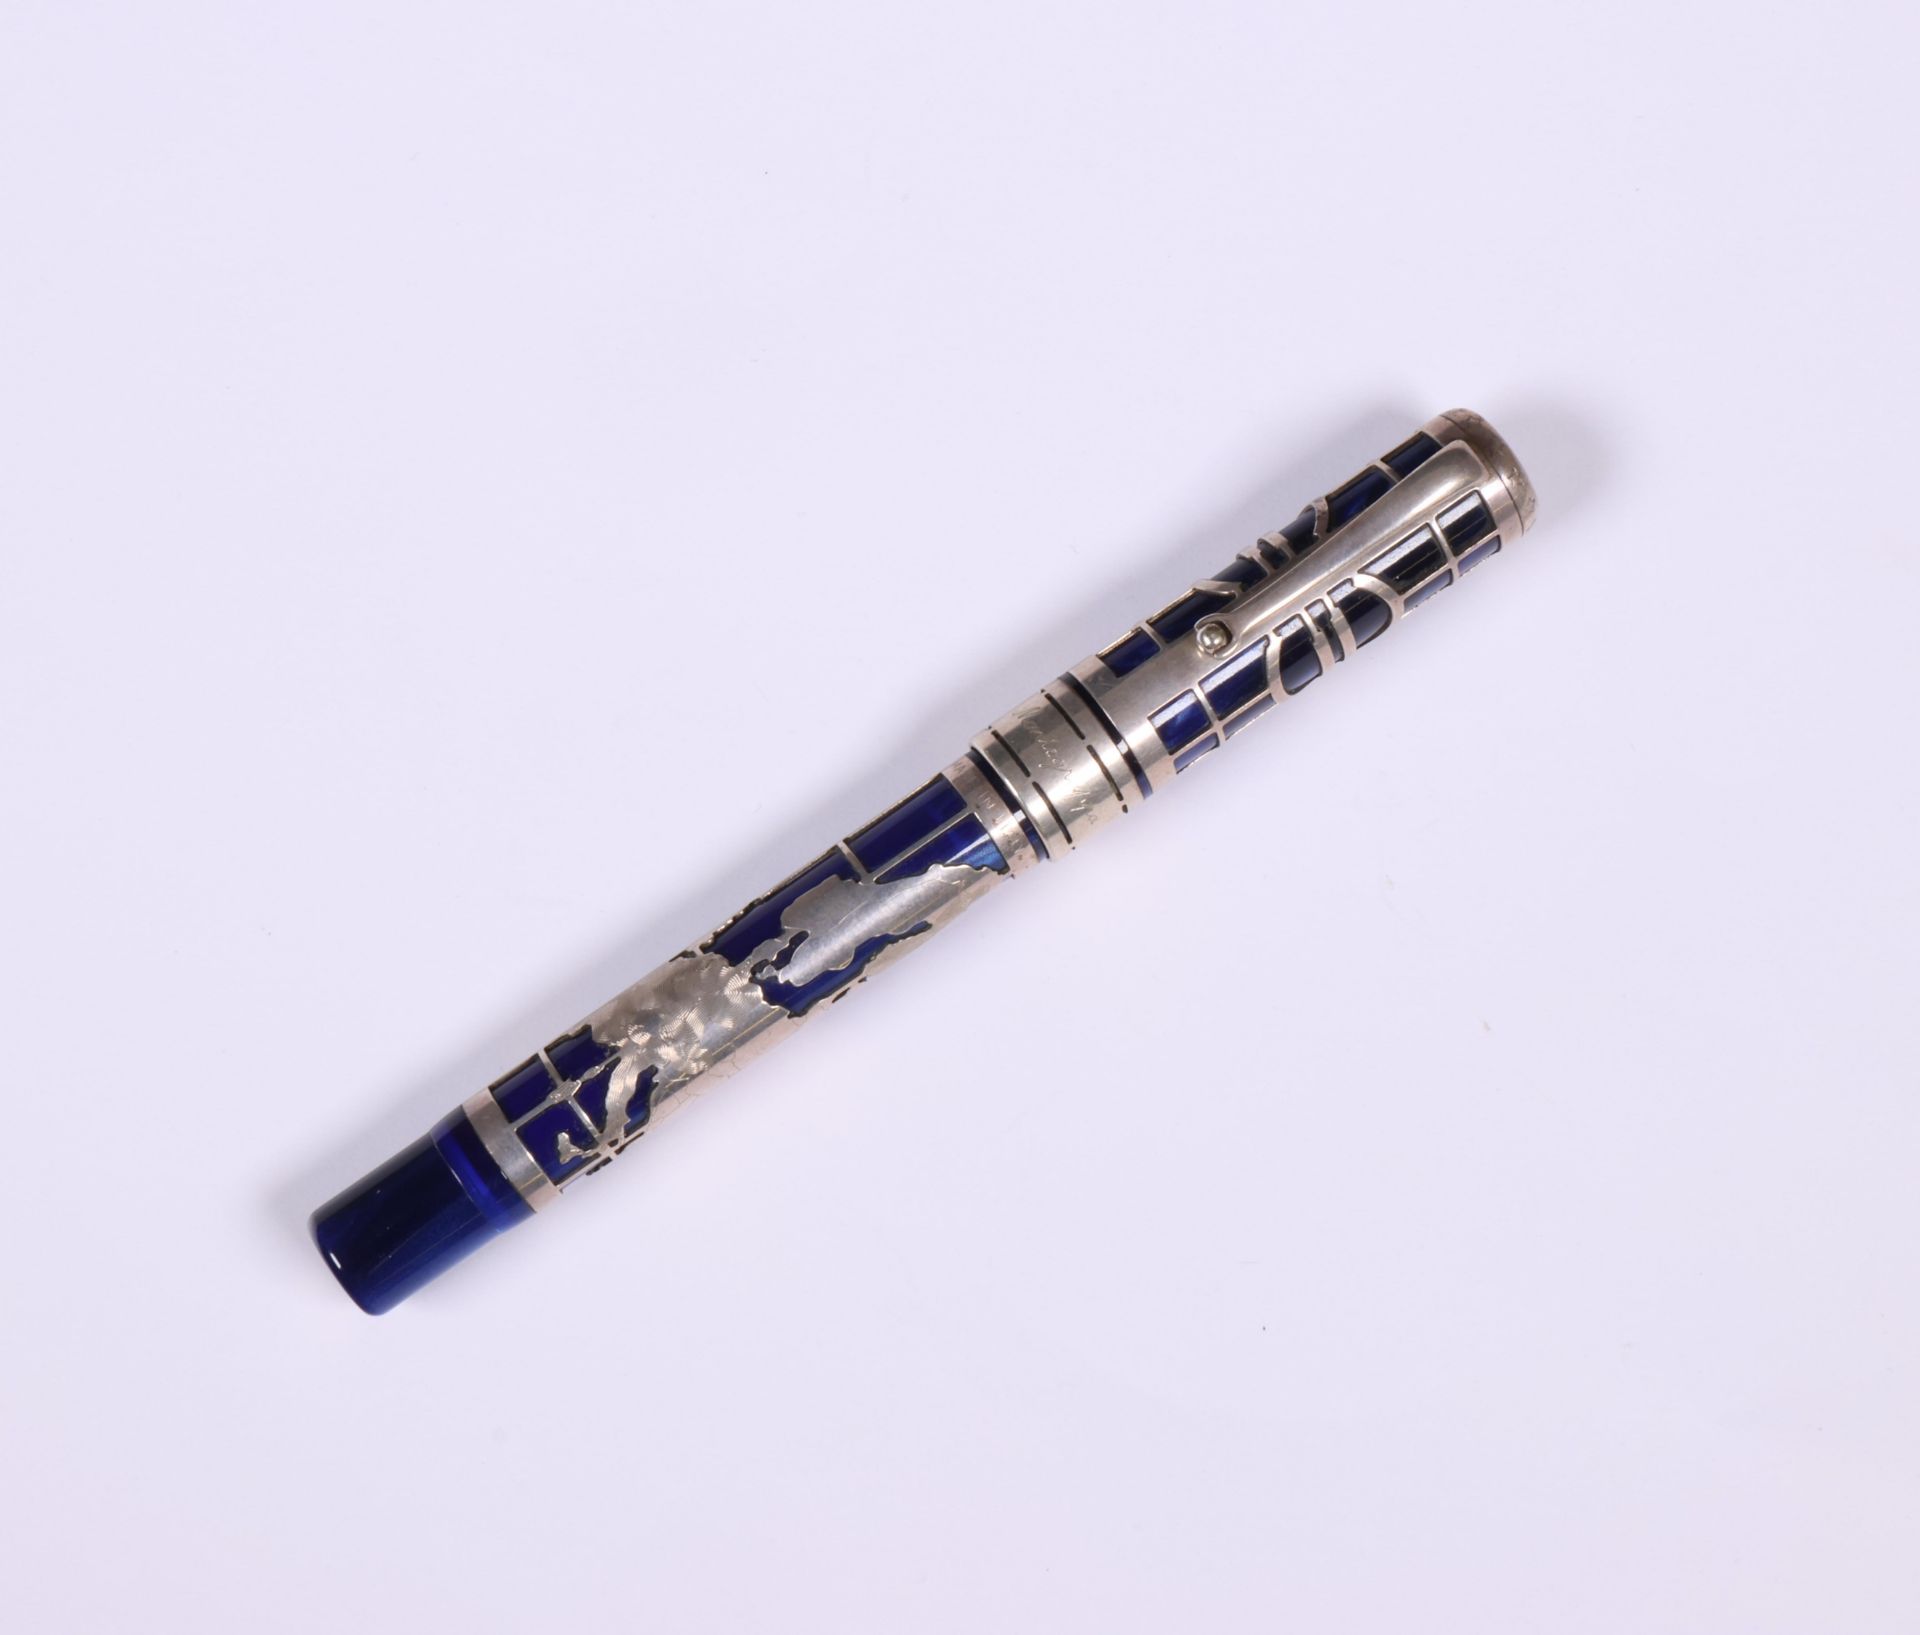 Montegrappa limited edition vulpen, Euro 2002 pen - Image 2 of 4